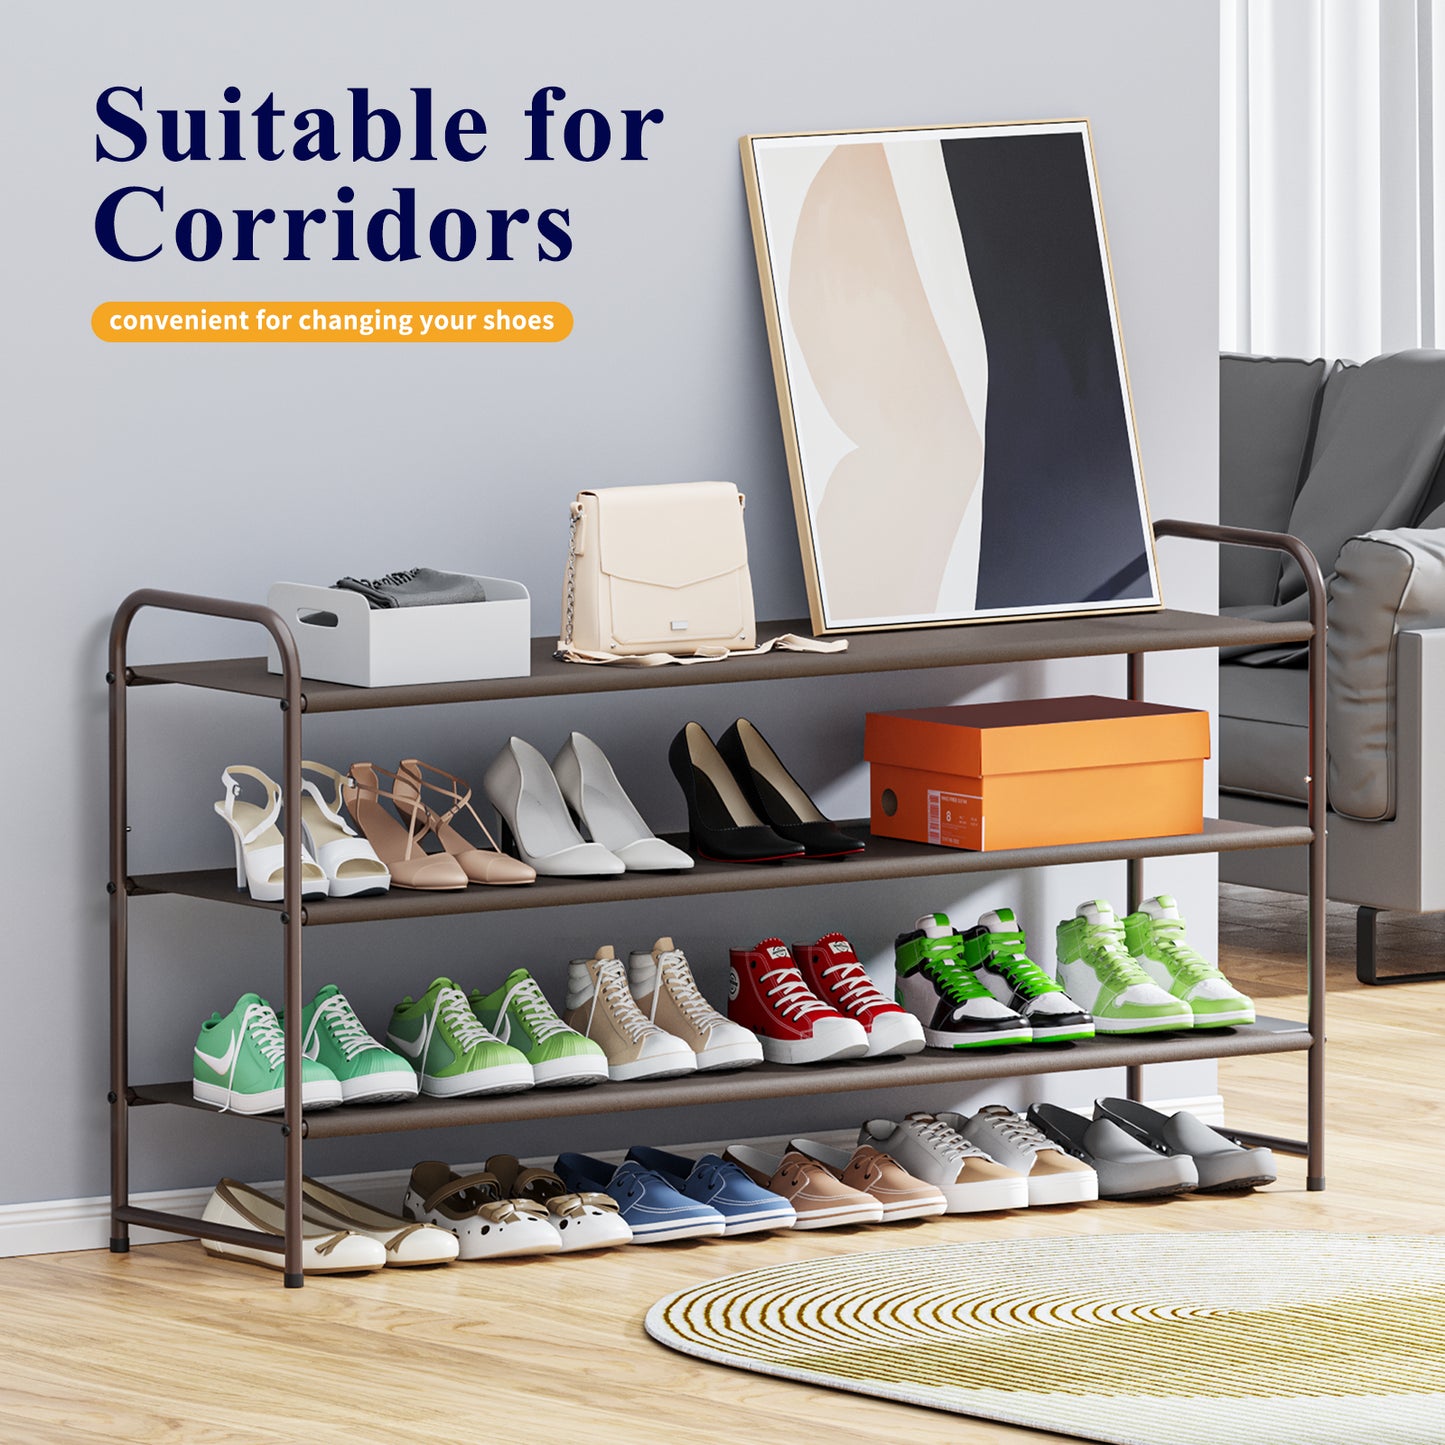 Kitsure Shoe Rack for Entryway - Sturdy & Durable Long Stackable Shoe Organizer for Closet, 3-Tier Space-Saving Metal Shoe Shelf for up to 24 Pairs, for Garage & Corridor（4032）